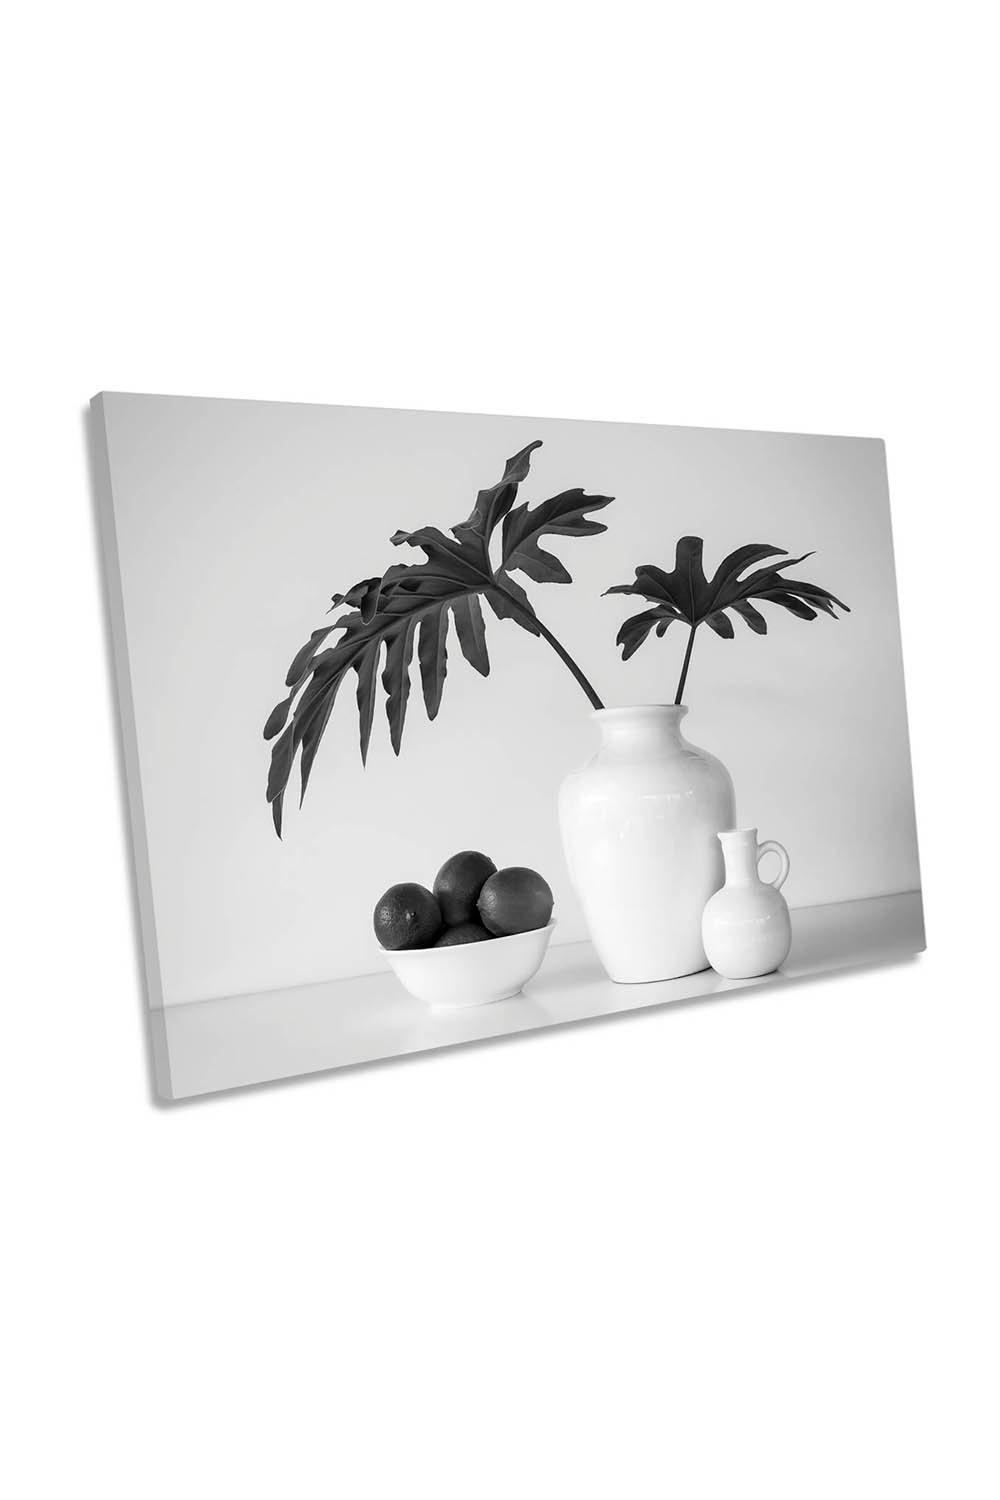 Tropical Leaves Still Life Vase Grey Canvas Wall Art Picture Print